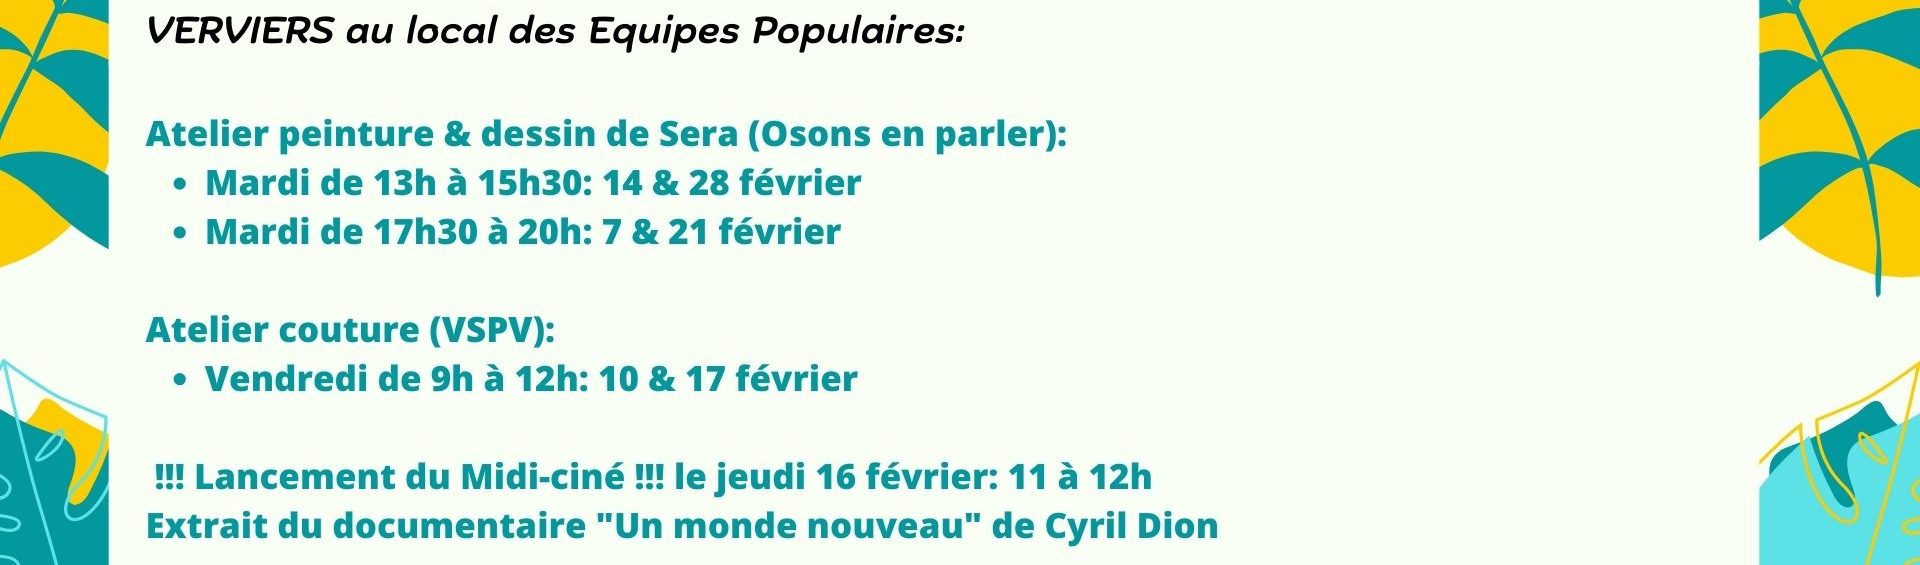 Equipes Populaires Verviers